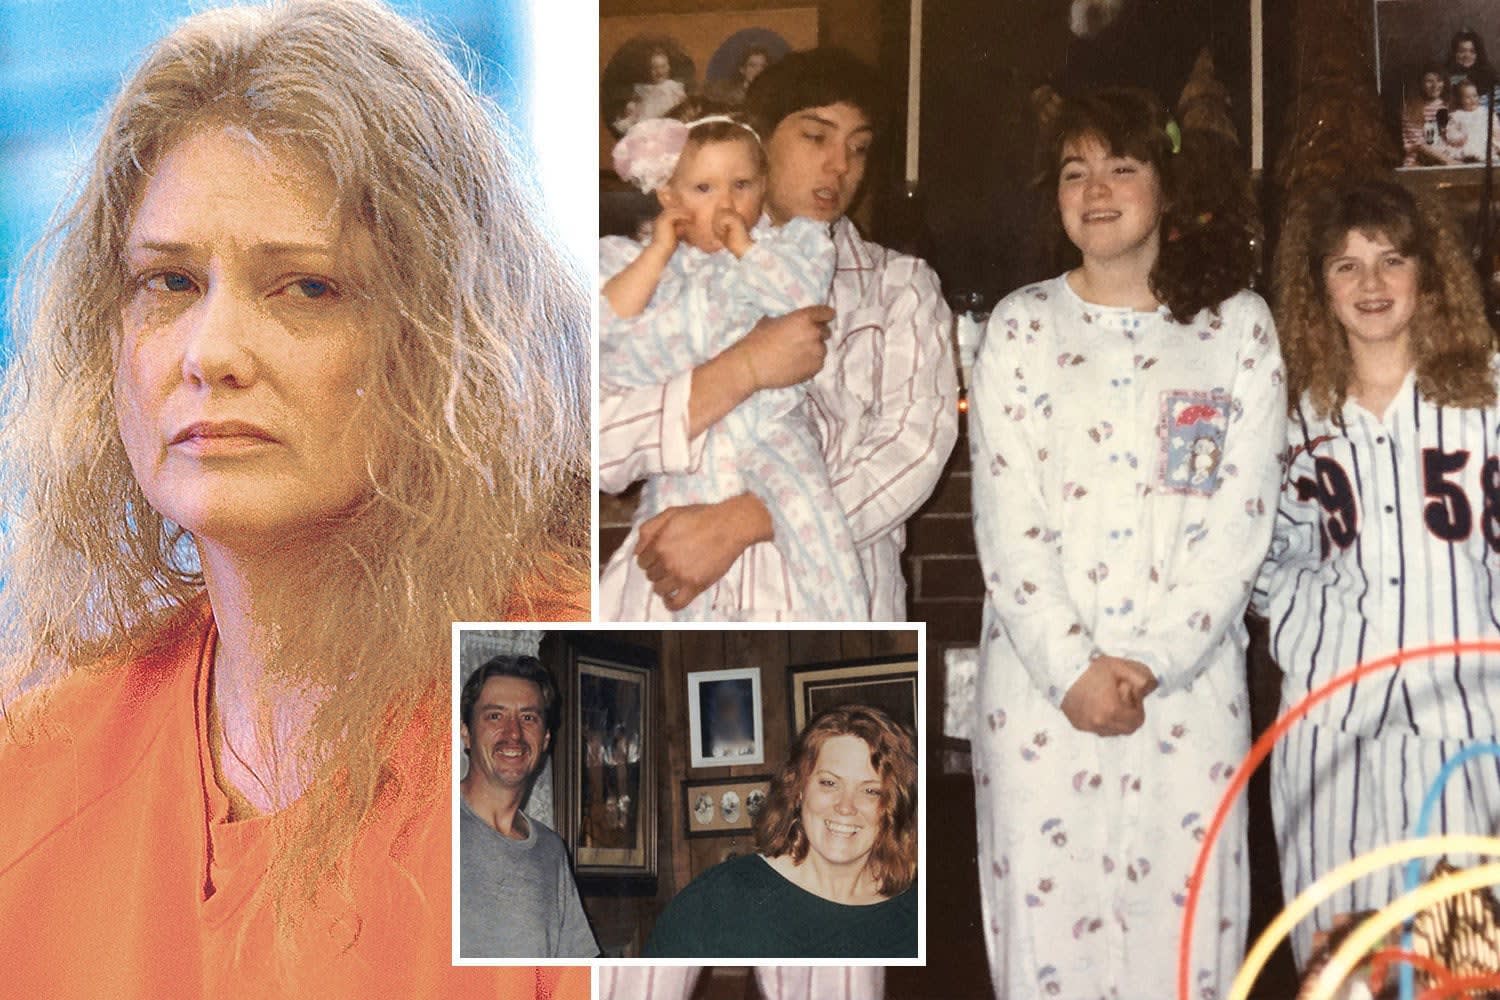 America's 'most evil mum' abused her daughters and tortured and killed her friends